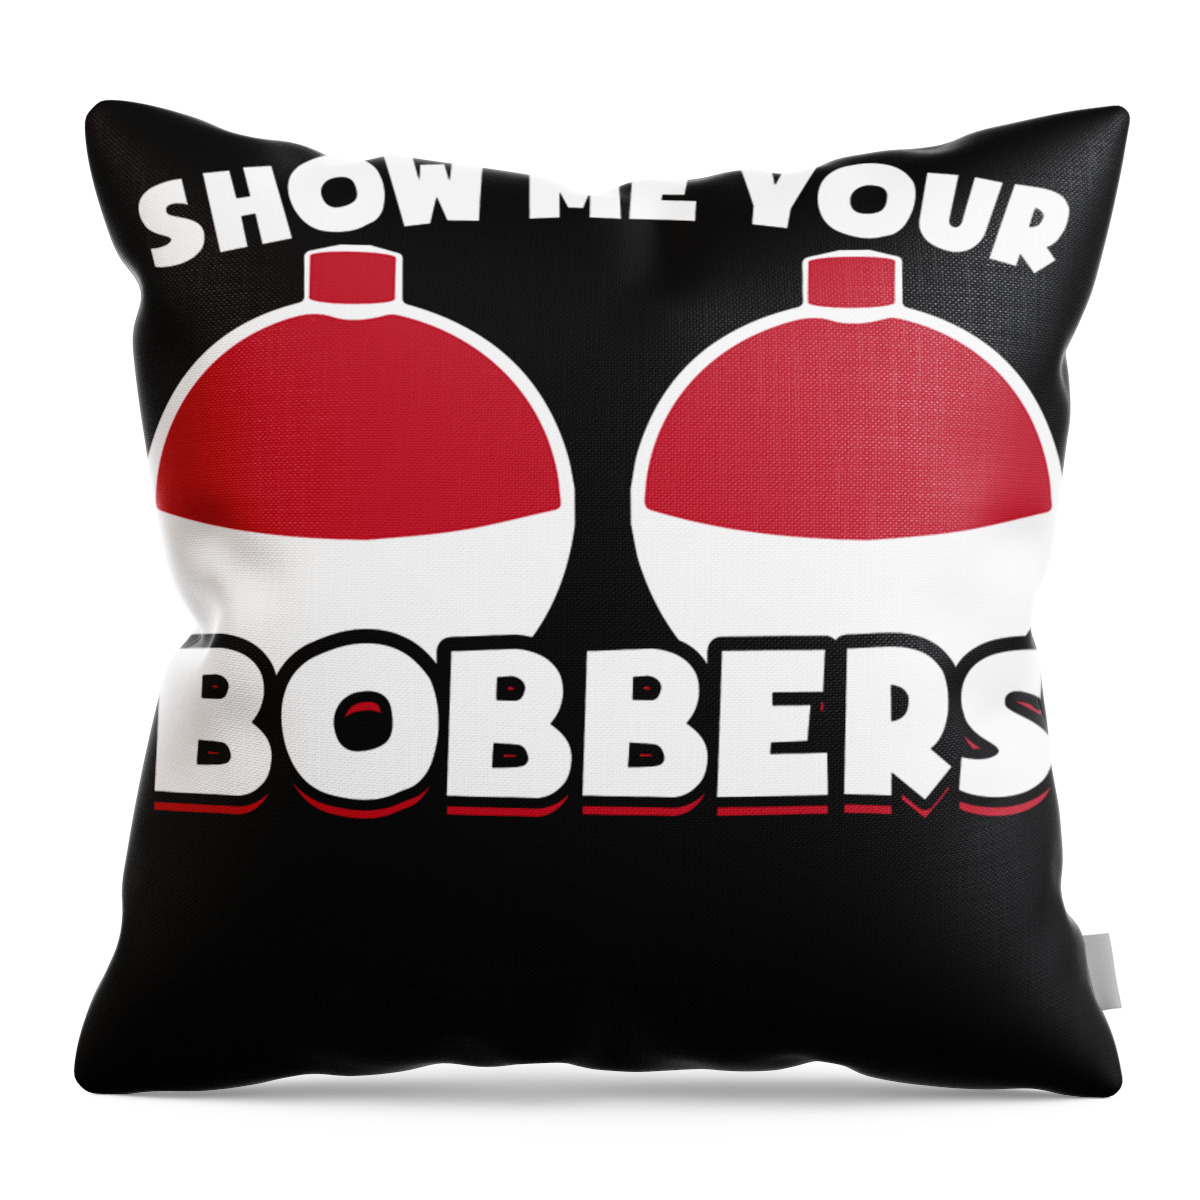 Funny Fishing Gifts Gear Show Me Your Bobbers Throw Pillow by Tom  Publishing - Fine Art America